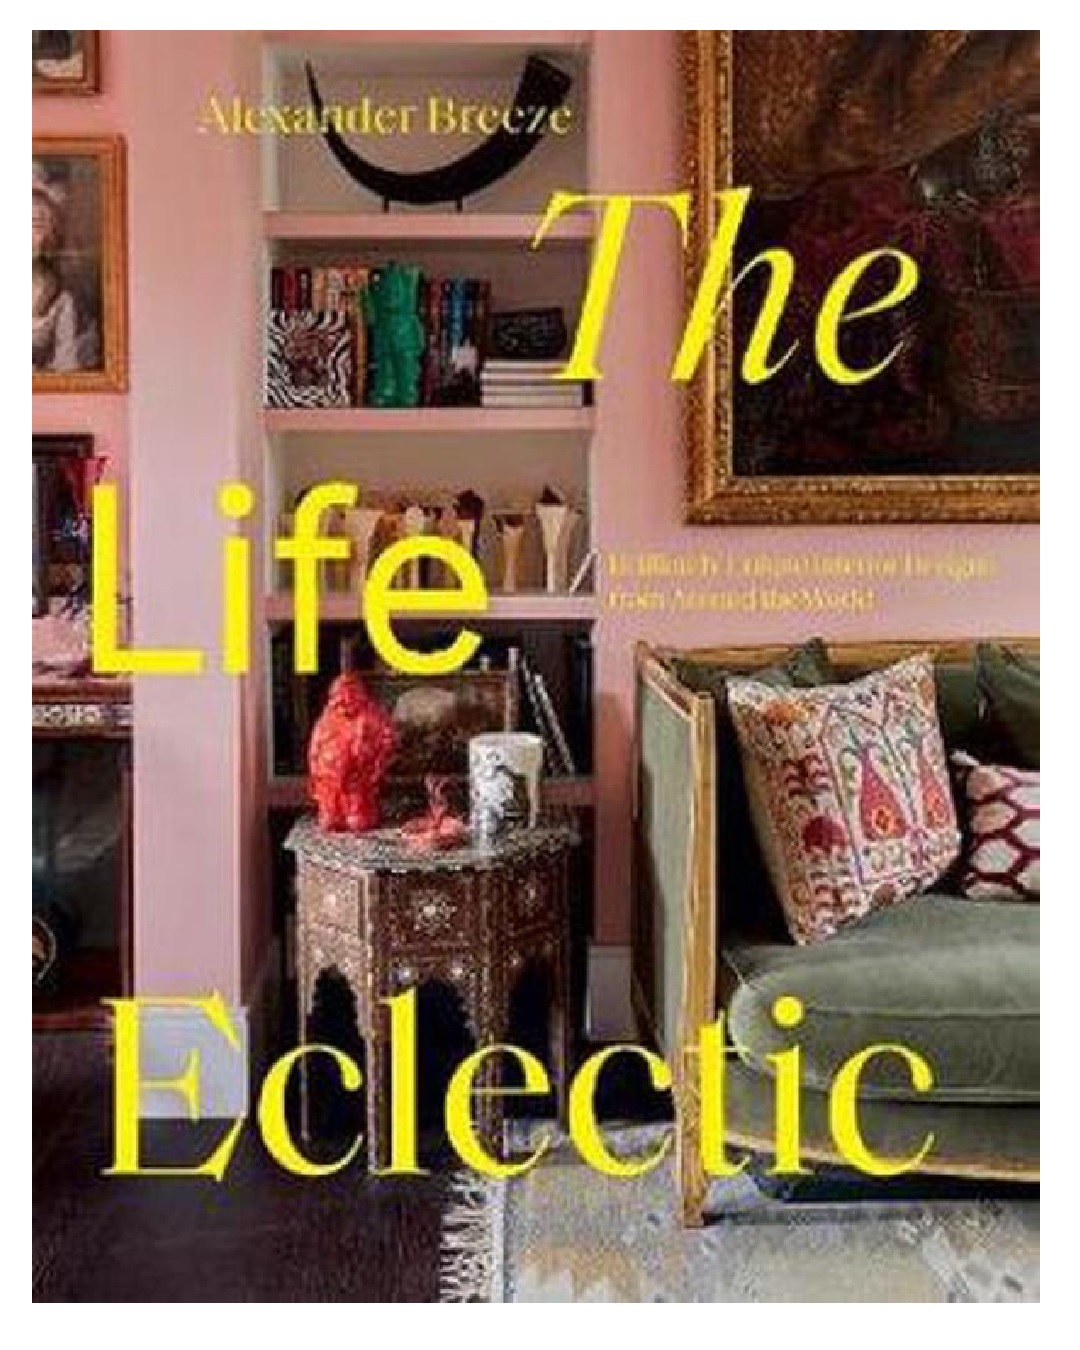 The life eclectic